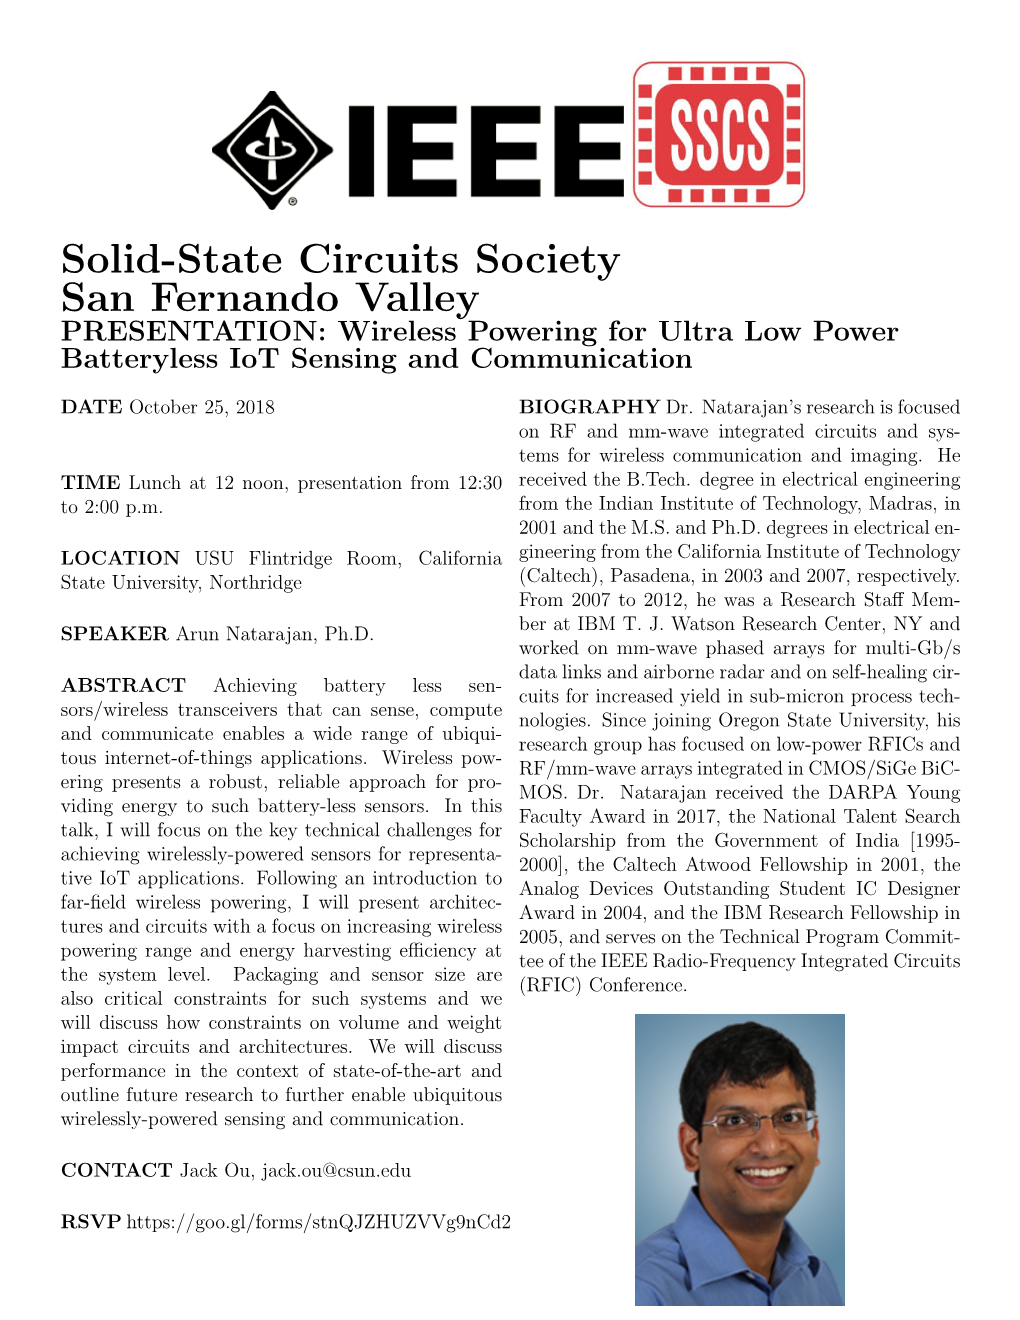 Solid-State Circuits Society San Fernando Valley PRESENTATION: Wireless Powering for Ultra Low Power Batteryless Iot Sensing and Communication